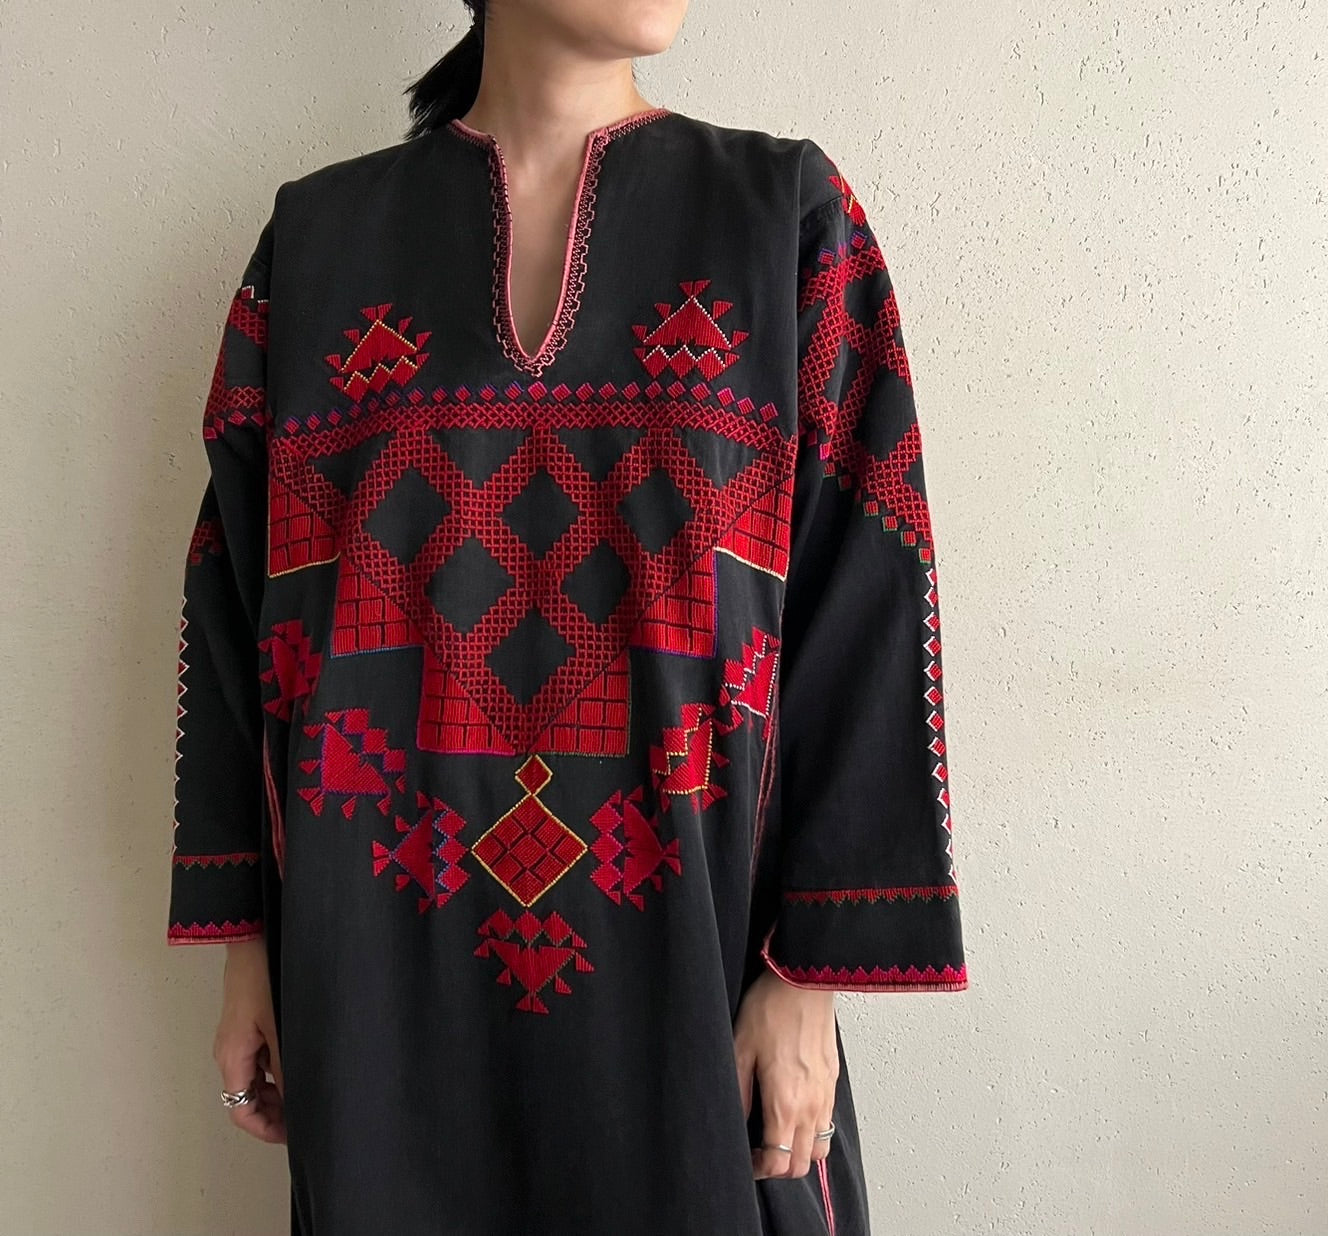 70s Embroidery Dress